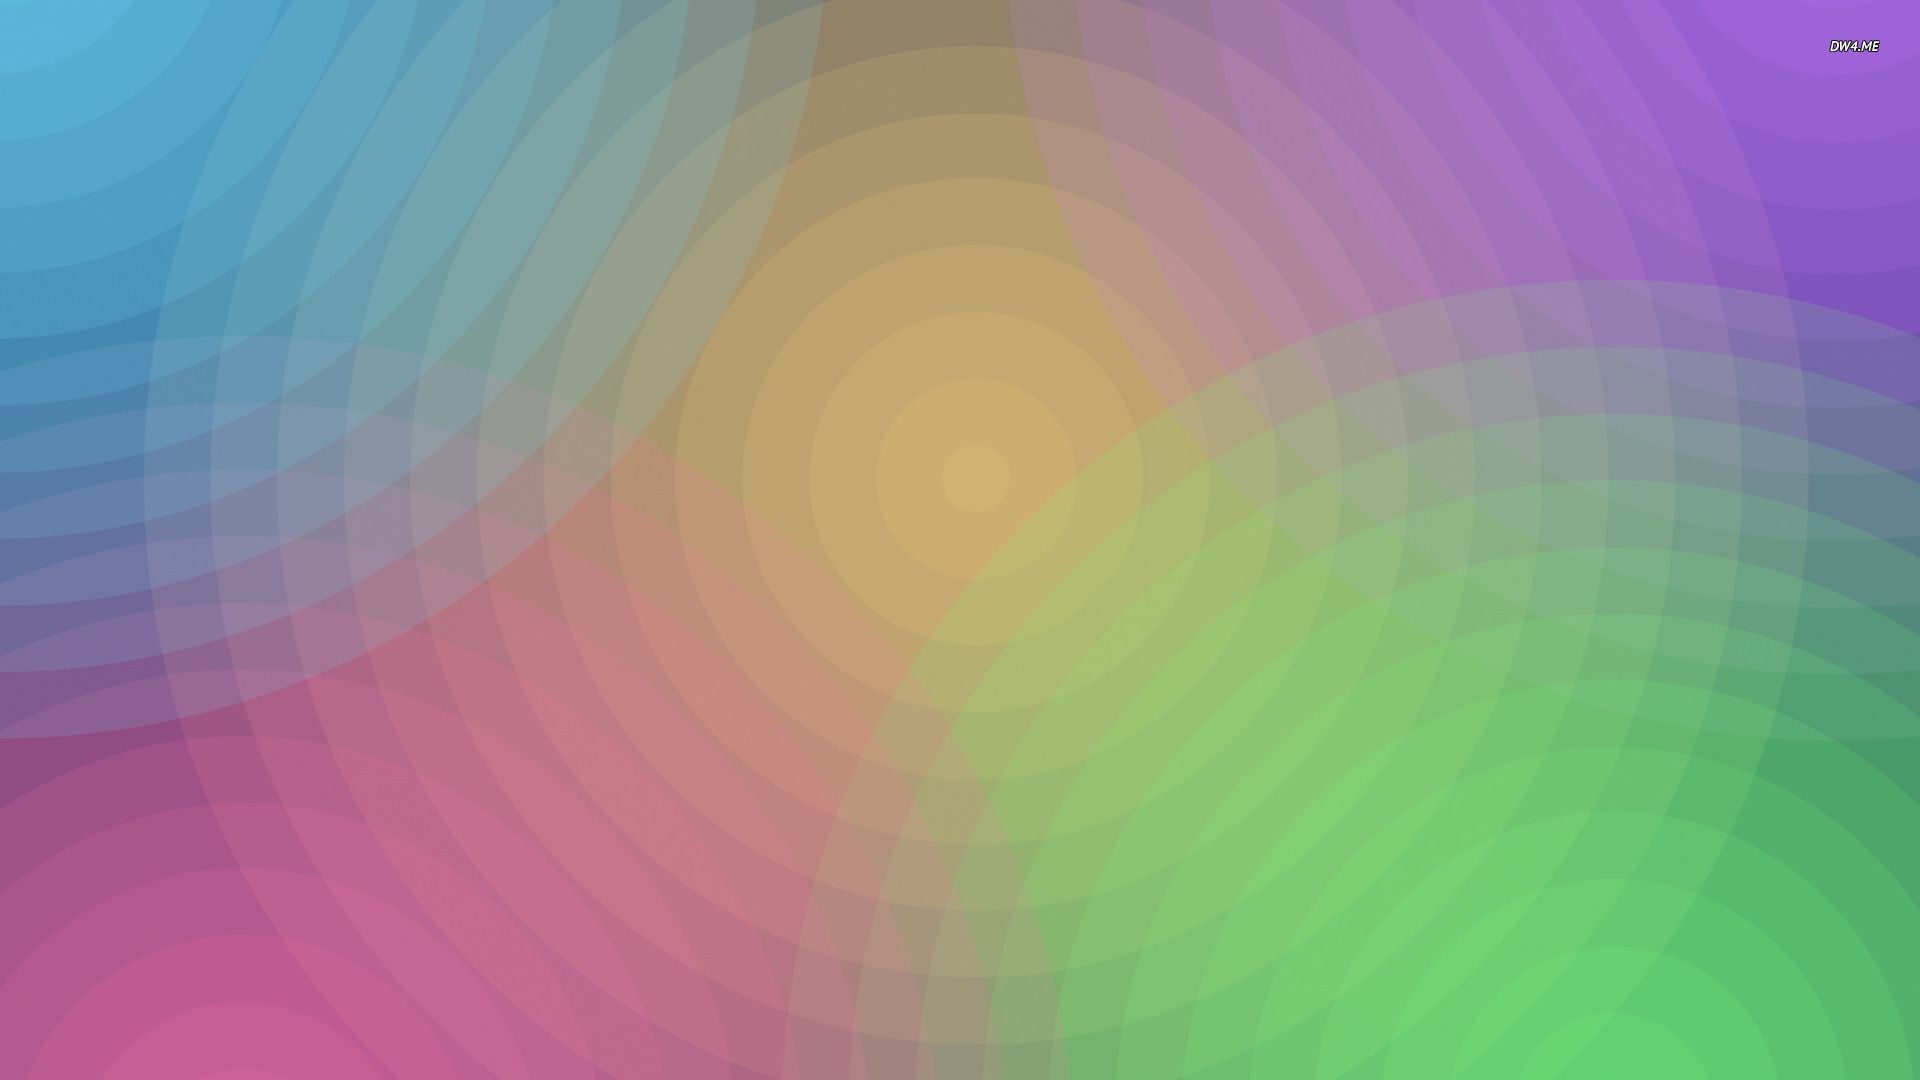 Pastel Abstract Wallpapers - 4k, HD Pastel Abstract Backgrounds on